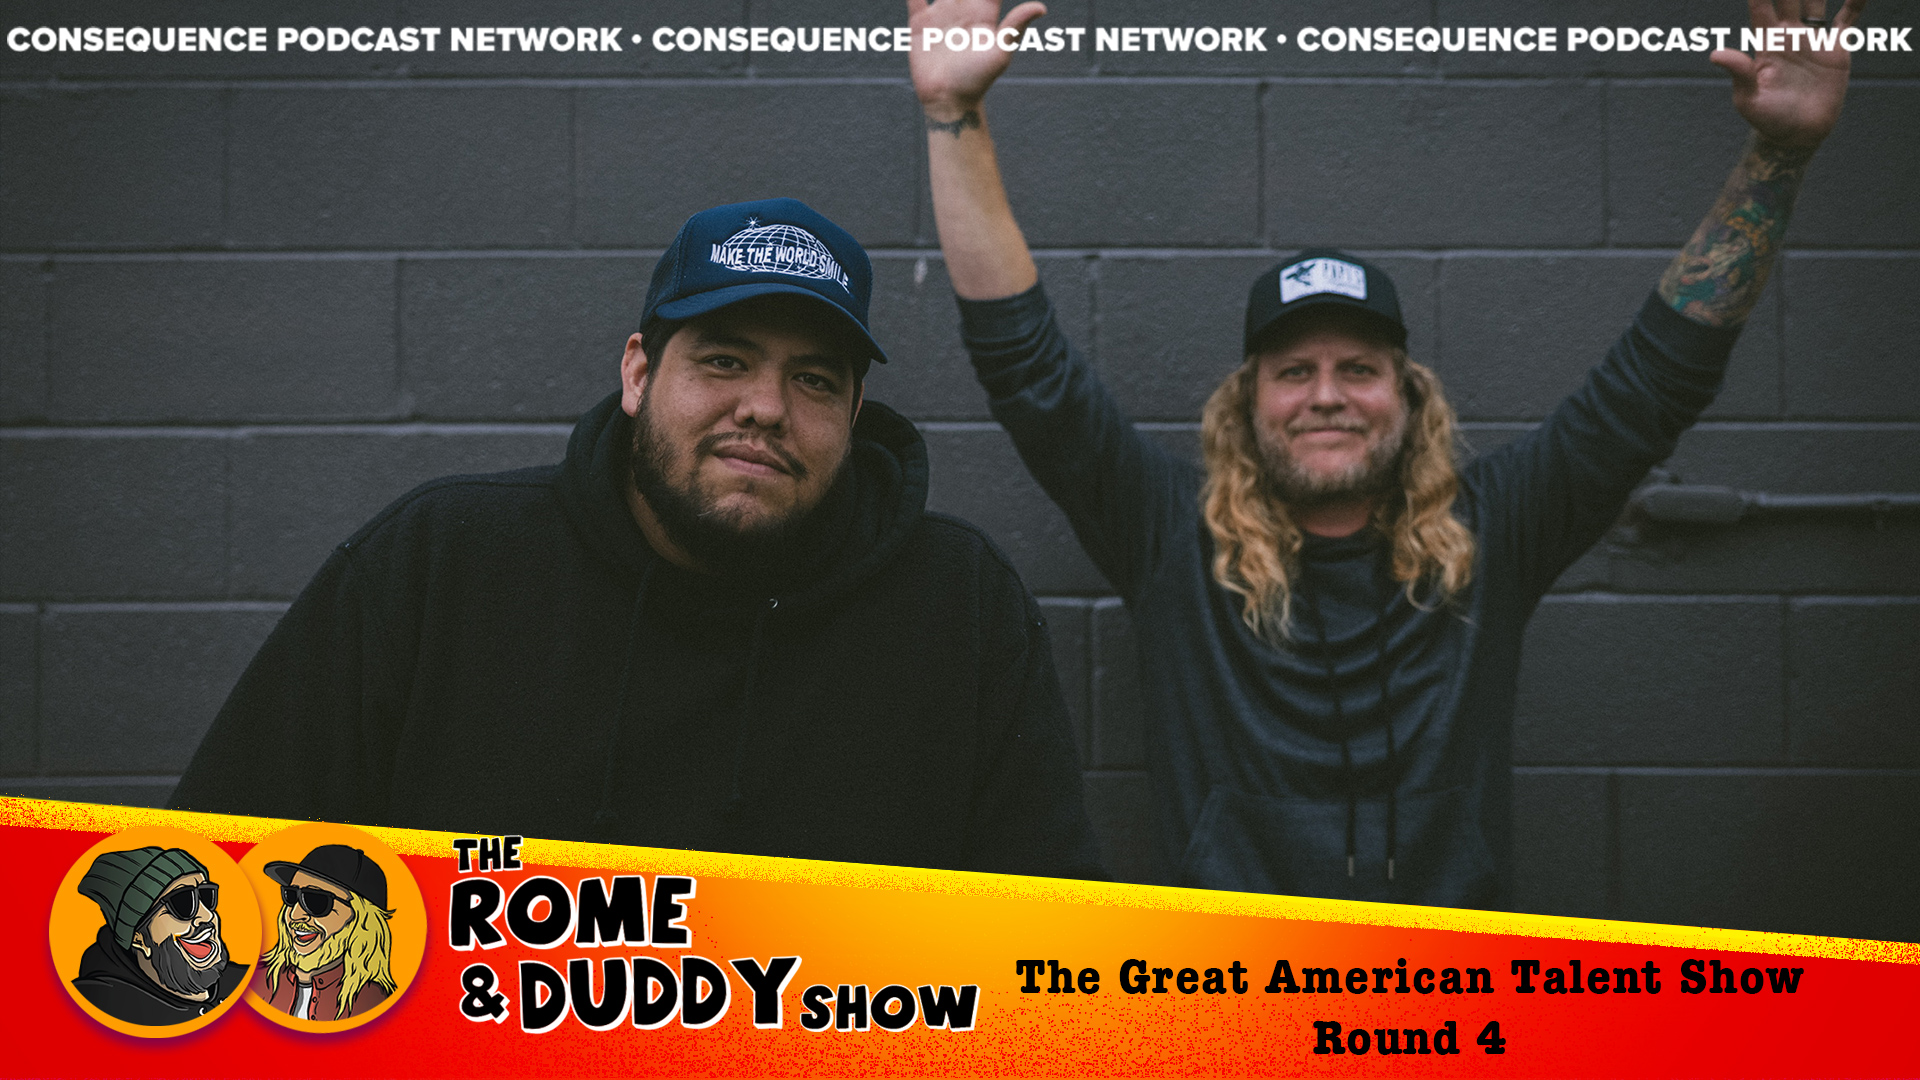 The Rome and Duddy Show: The Great American Talent Show Round 4